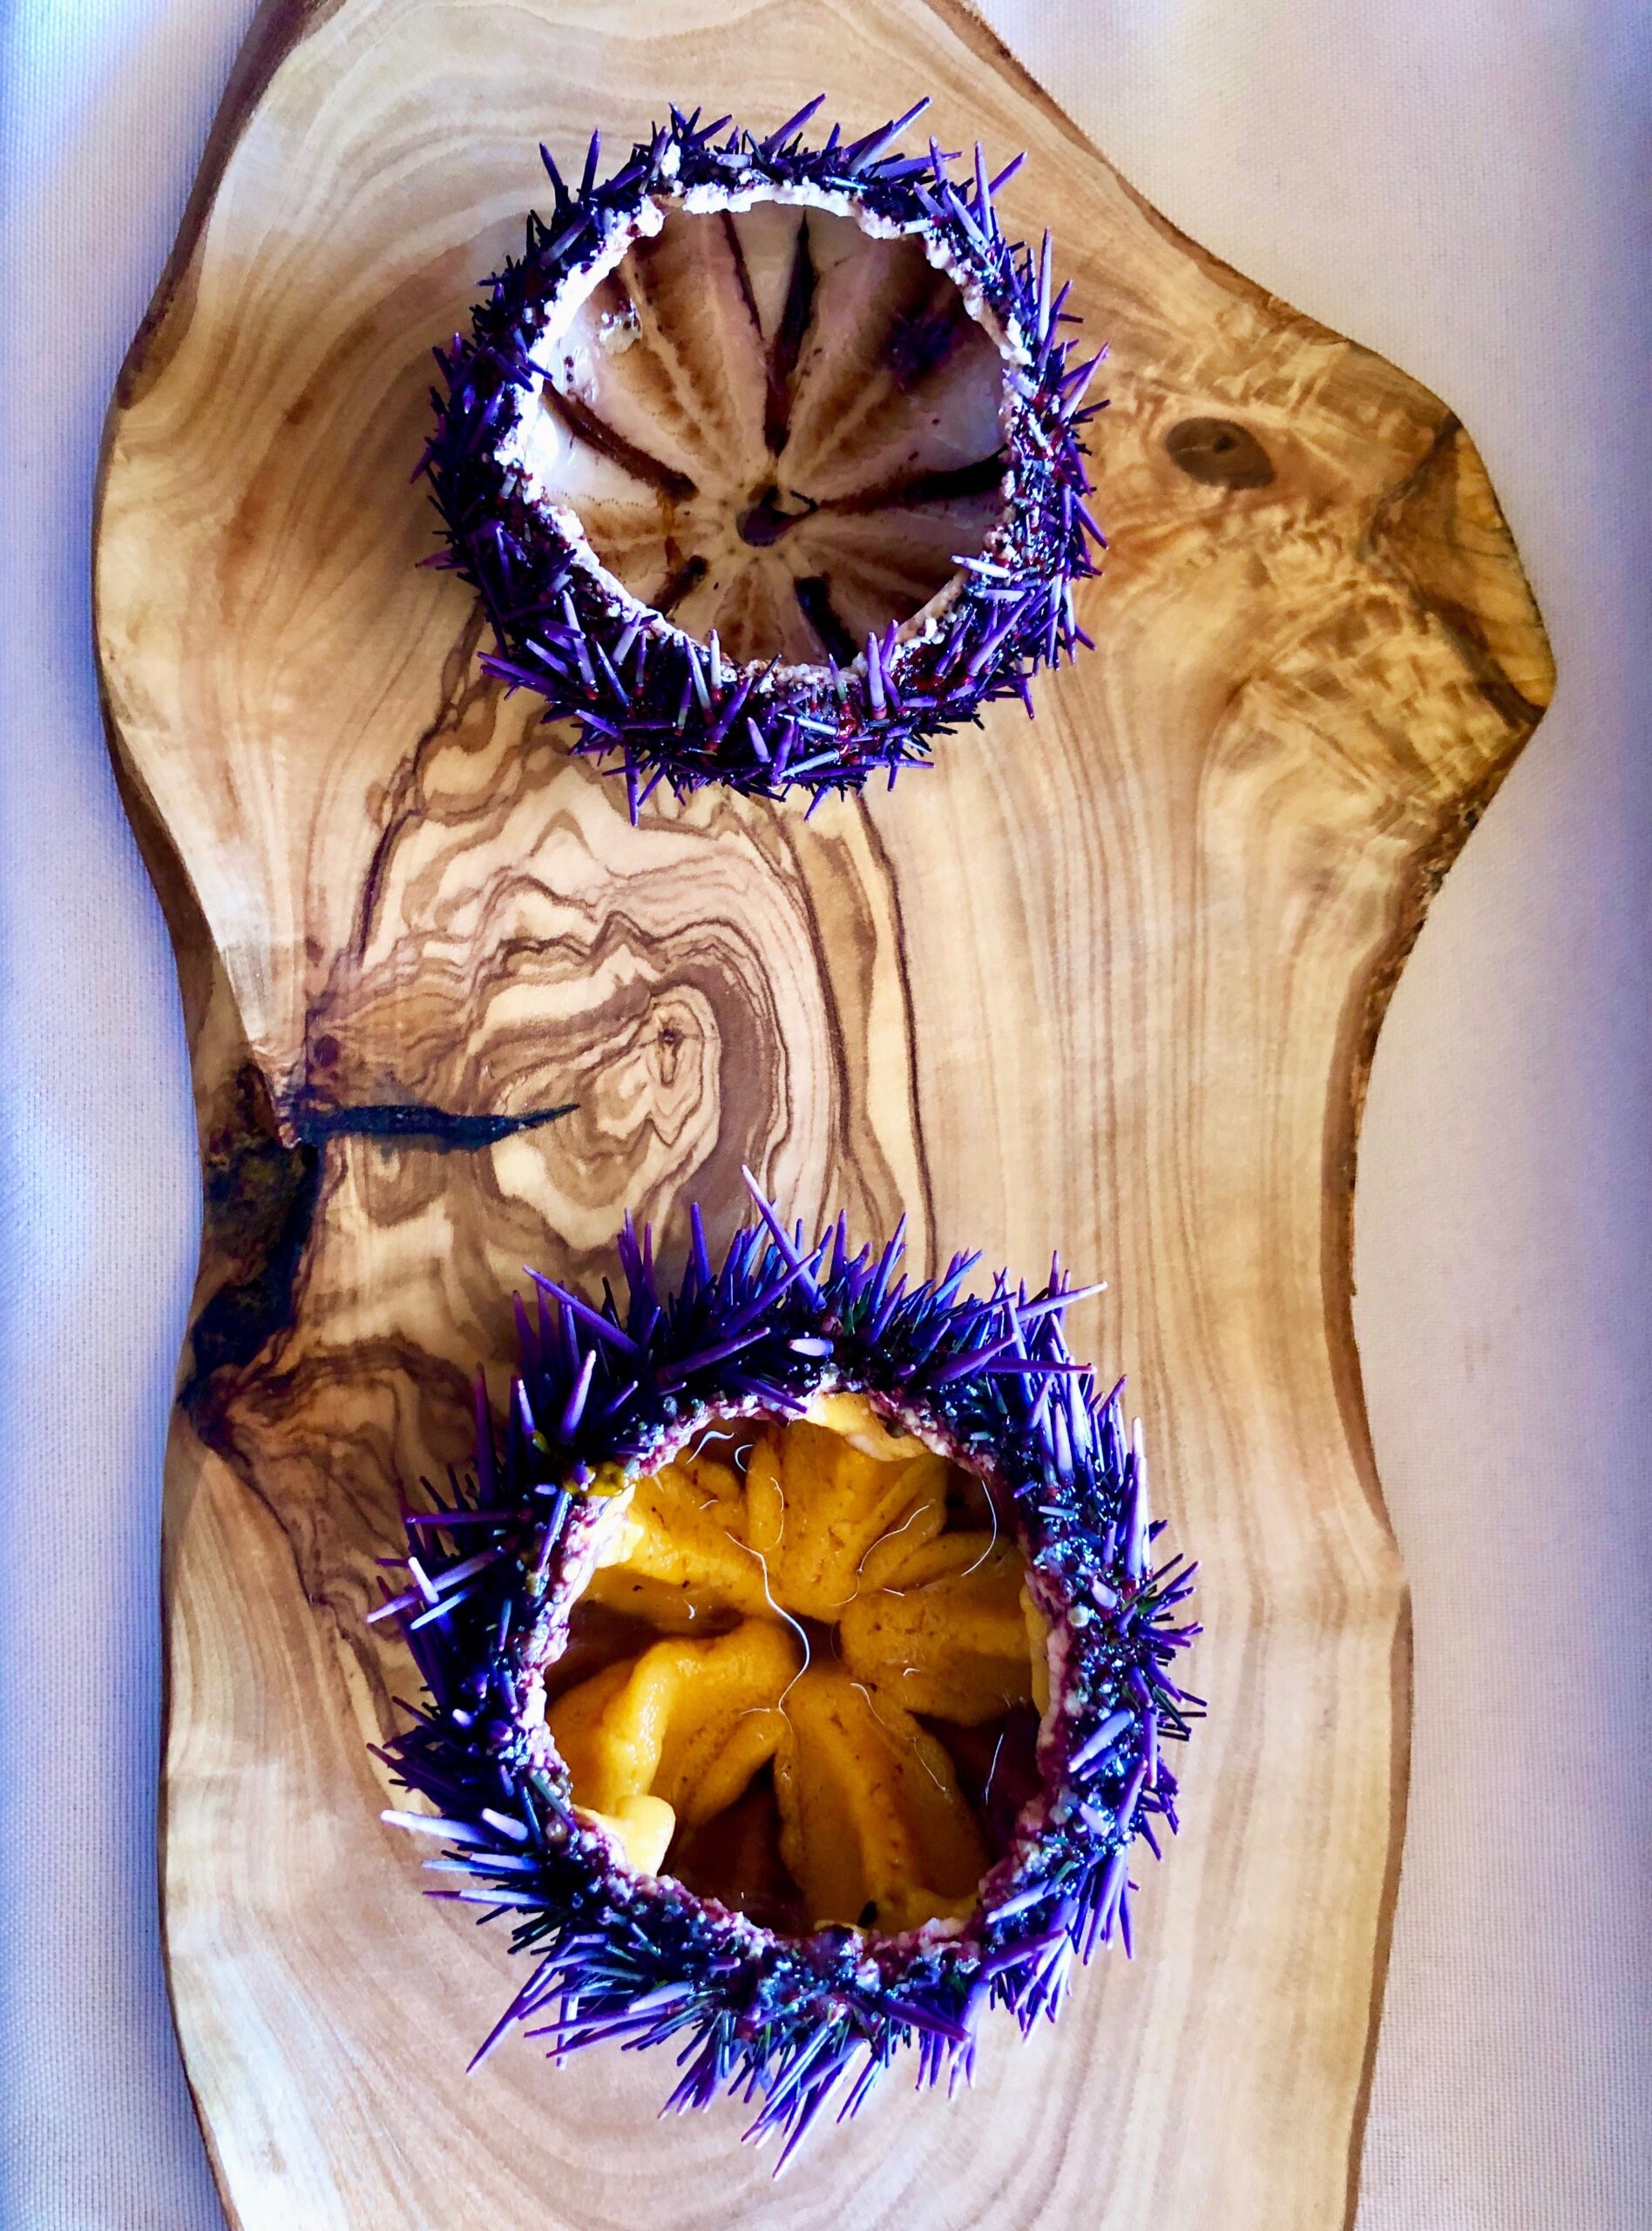 Sweet and briny, the orange roe of purple sea urchins is a prized ingredient for North Coast chefs. courtesy Urchinomics